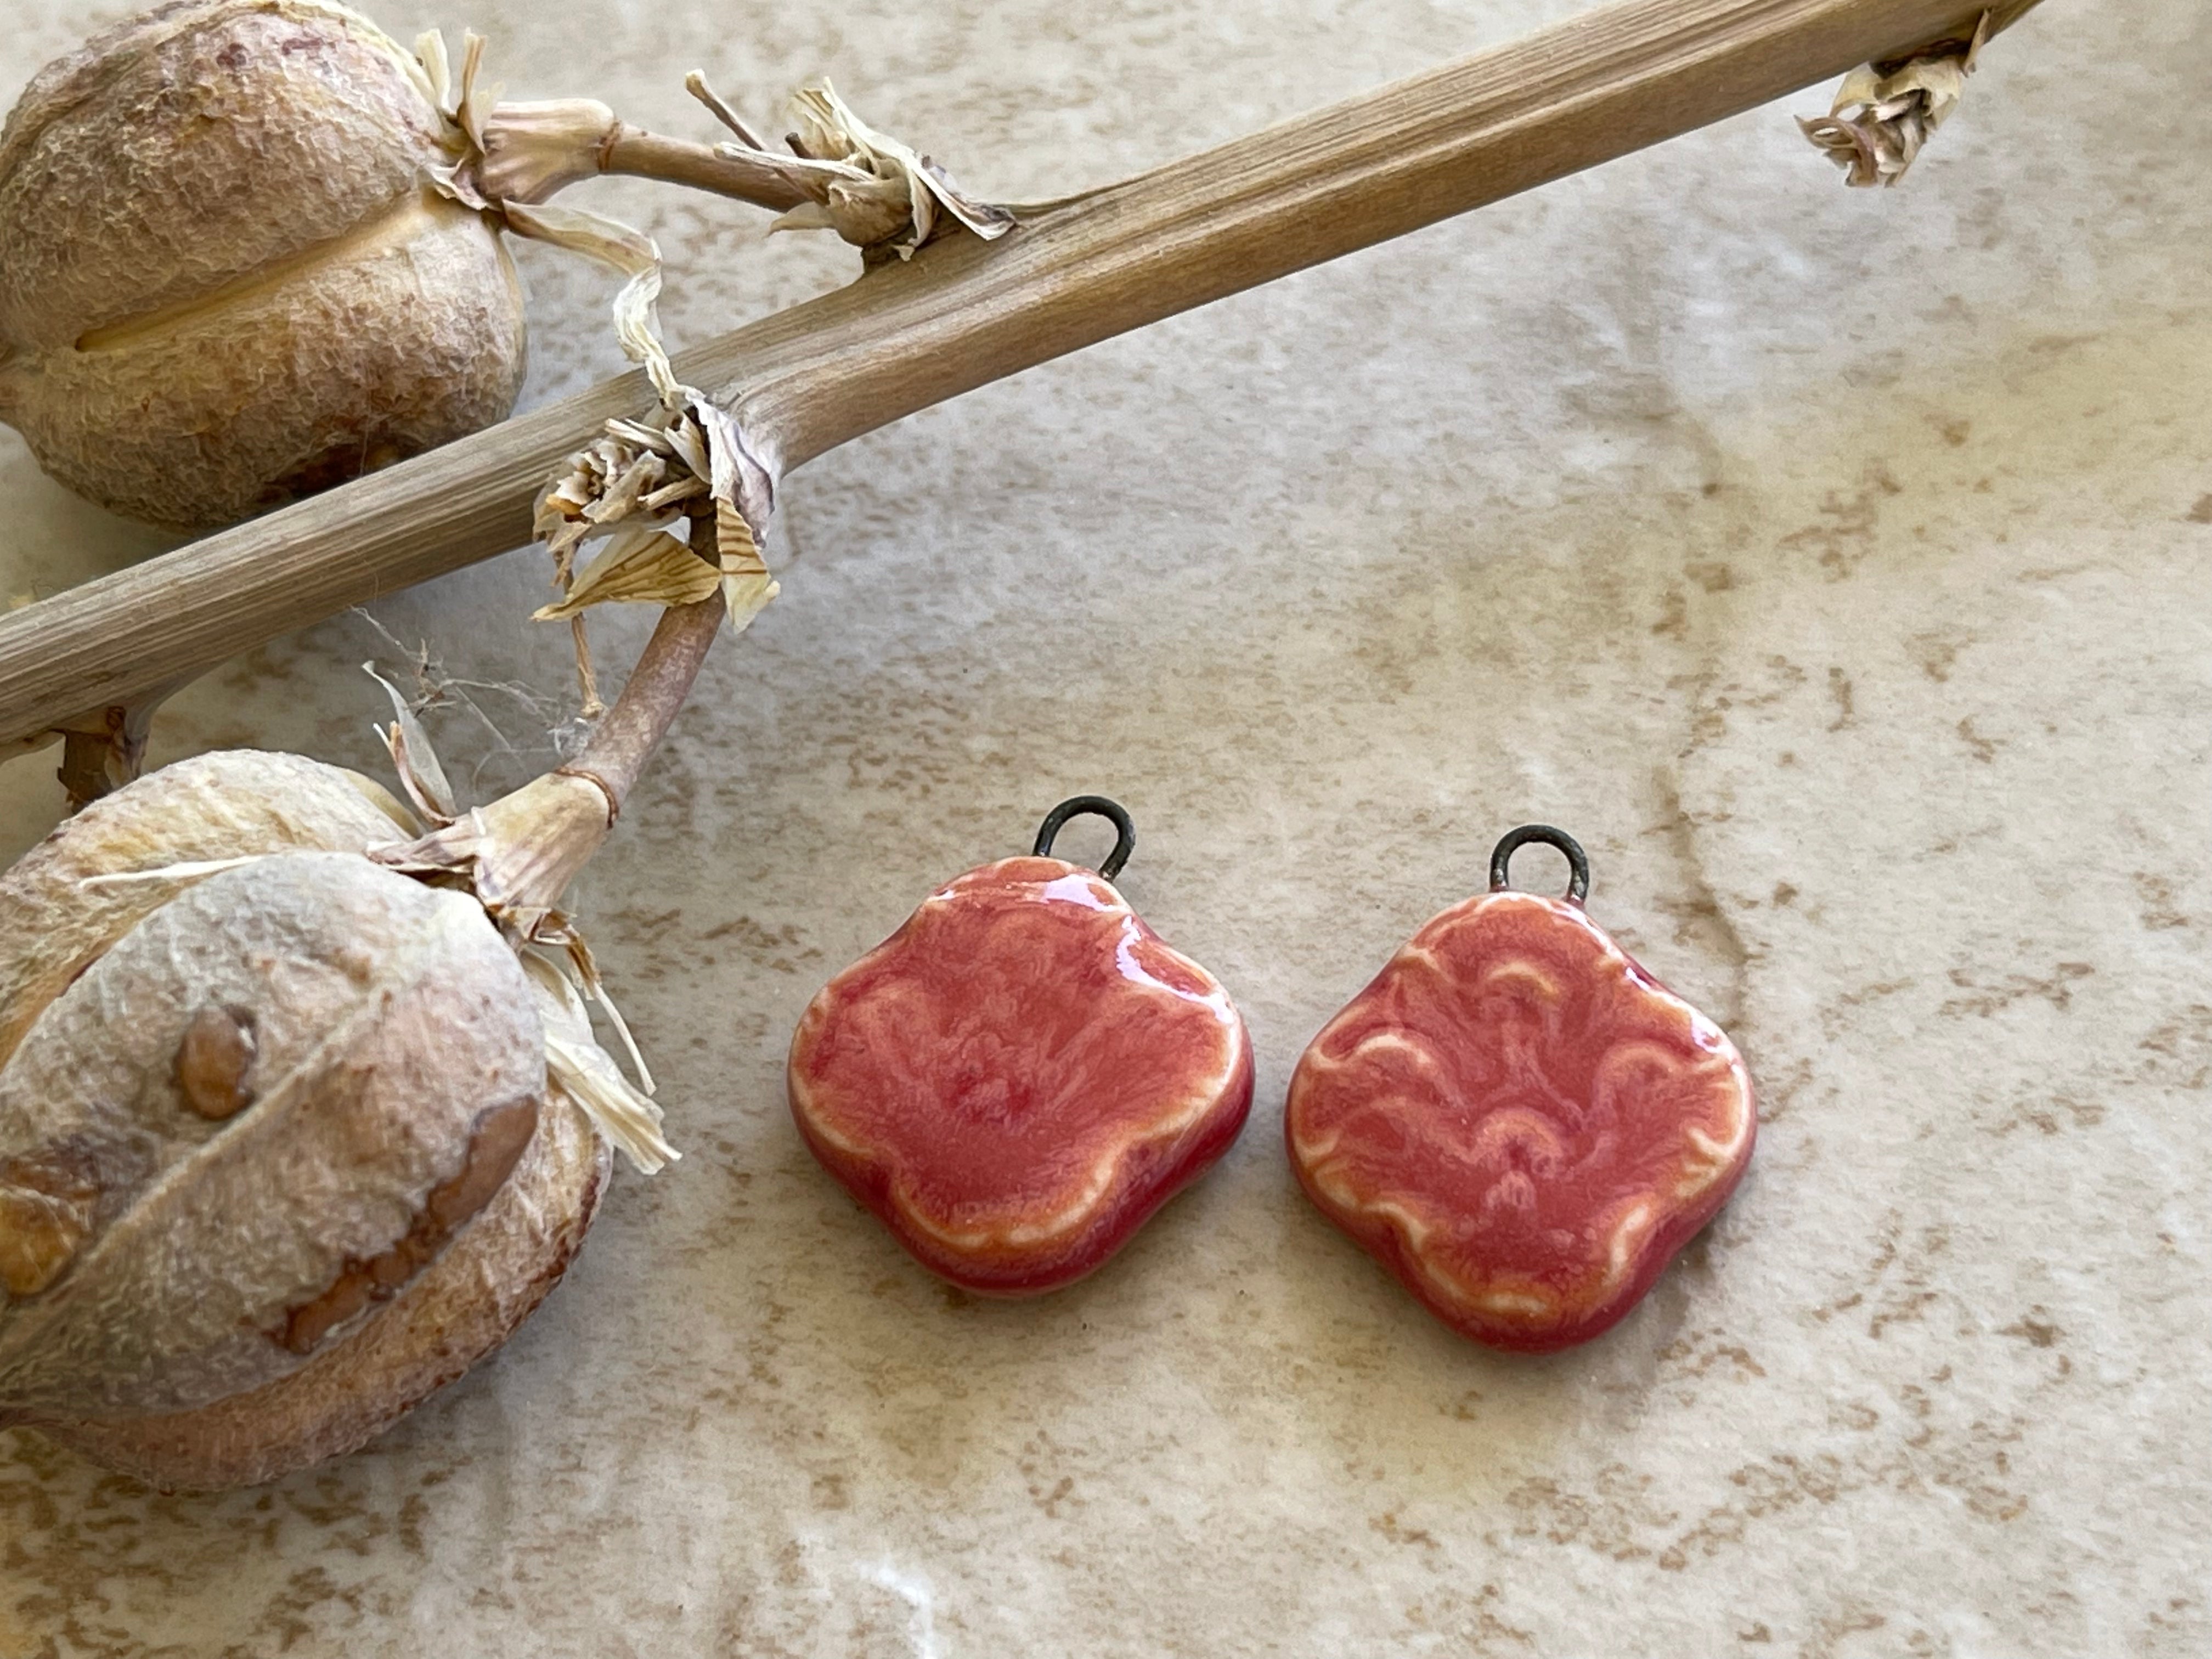 Red/Pink Quatrefoil Earring Bead Pair, Porcelain Ceramic Charms, Jewelry Making Components, Beading Handmade, DIY Earrings, DIY Beads